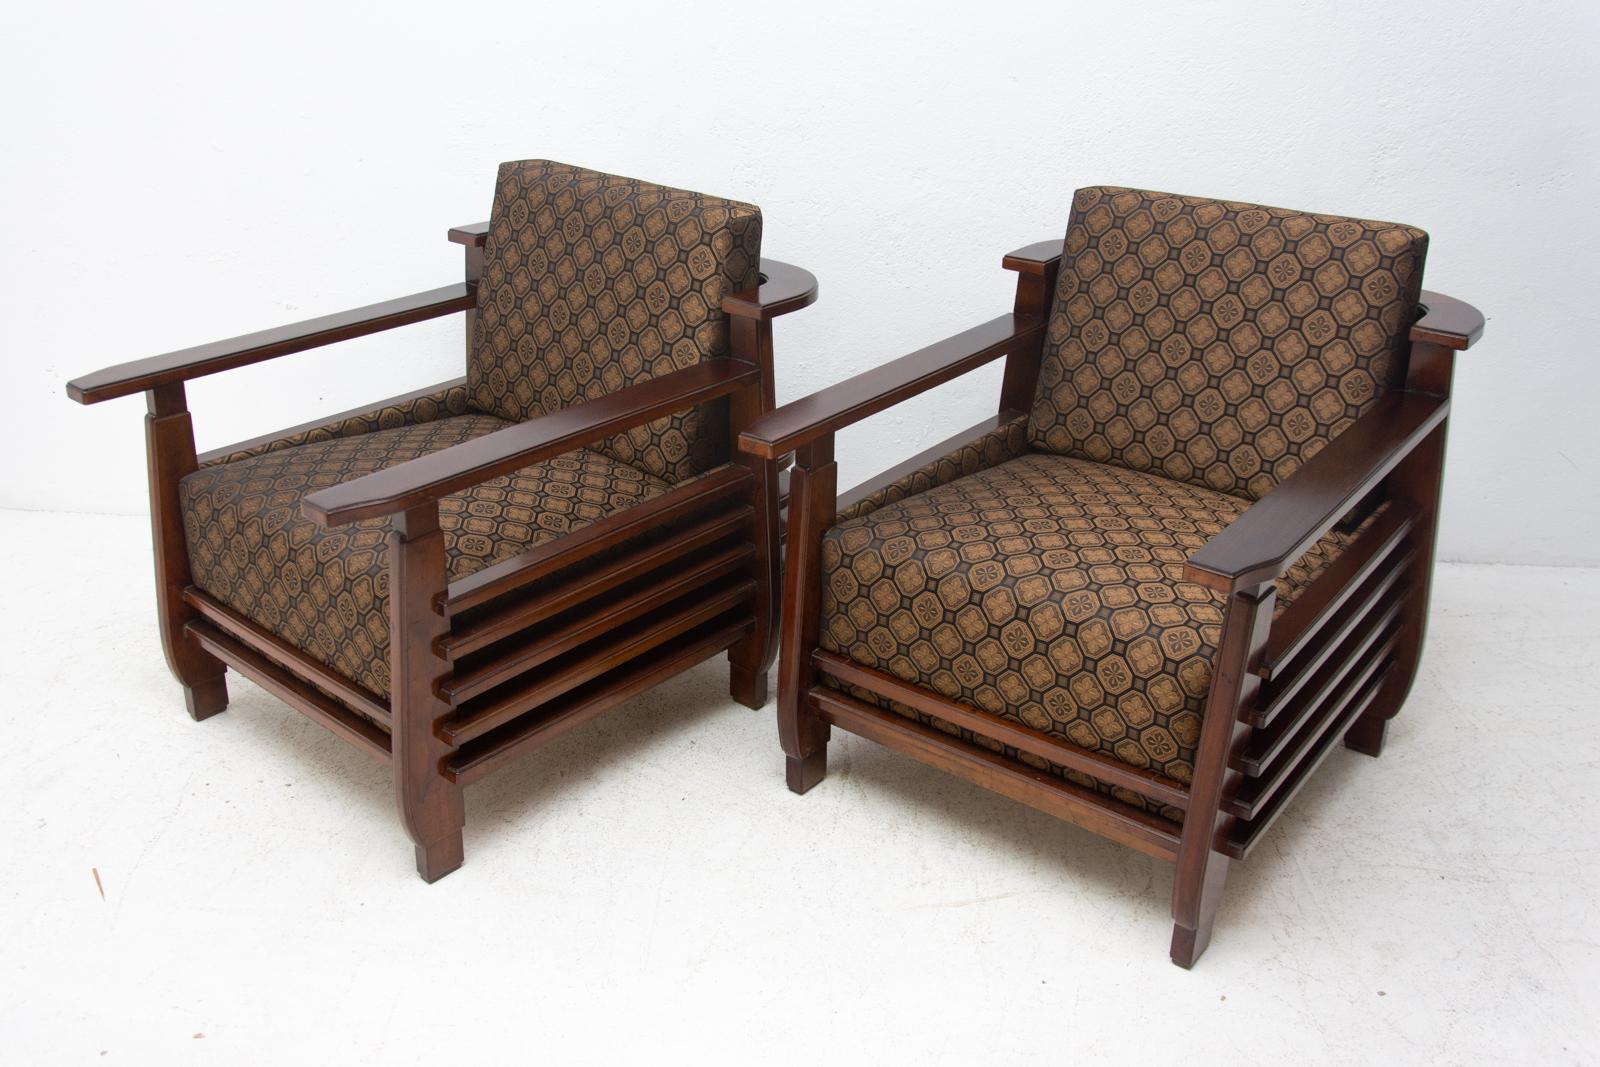 20th Century Pair of Fully Restored Functionalist Armchairs, 1930s, Austria, Bauhaus Period For Sale